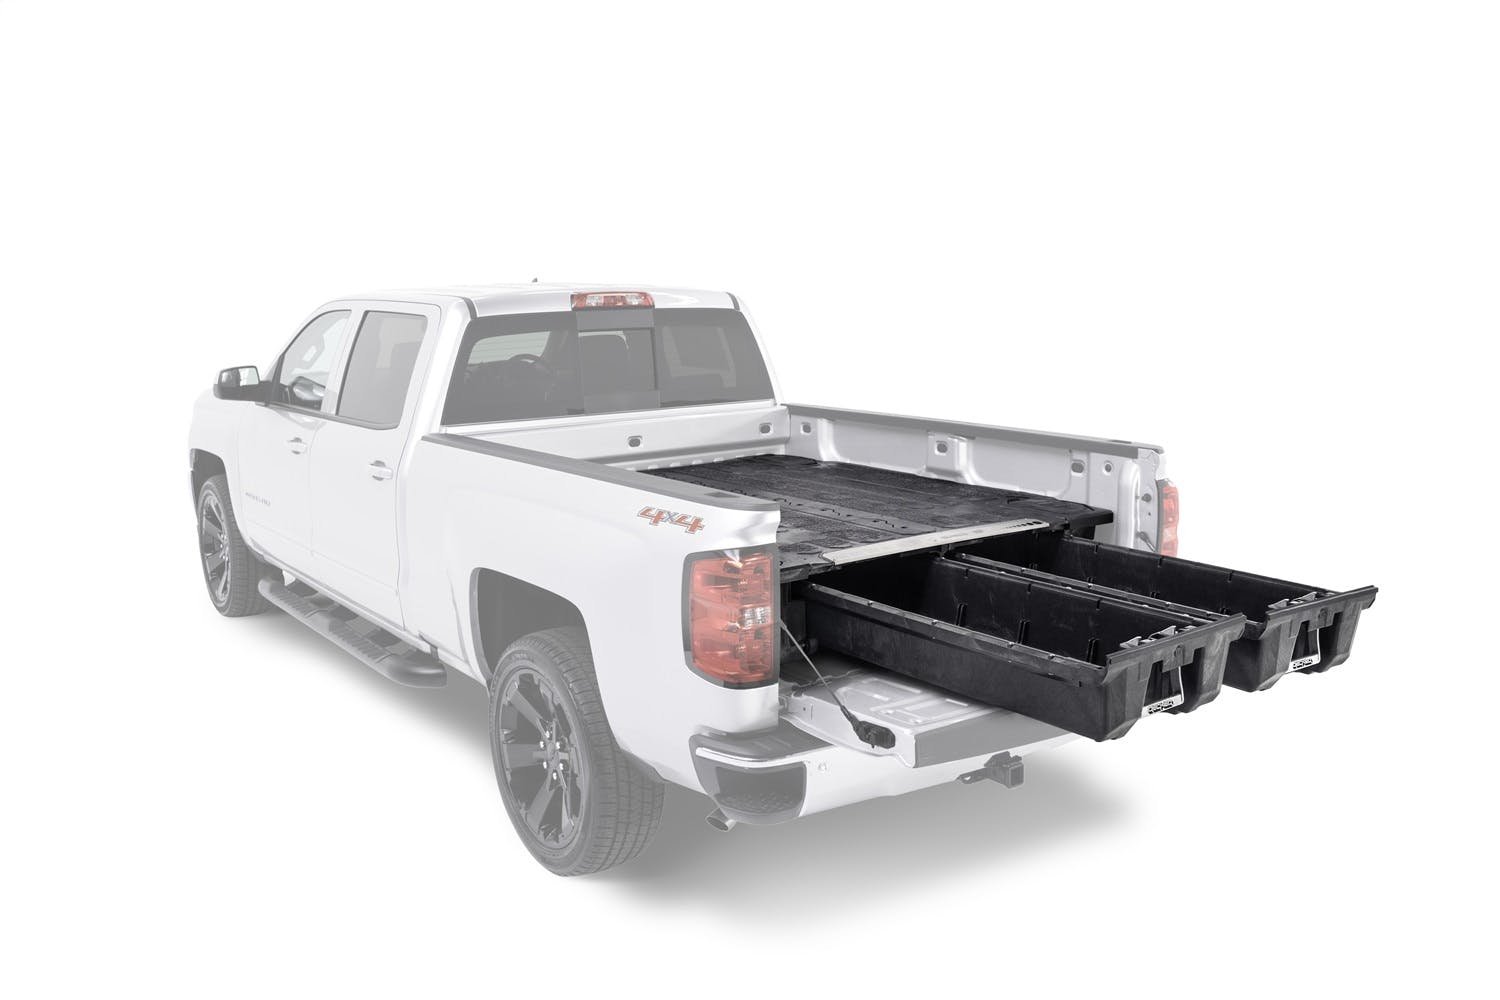 DECKED DR3 64.54 Two Drawer Storage System for A Full Size Pick Up Truck